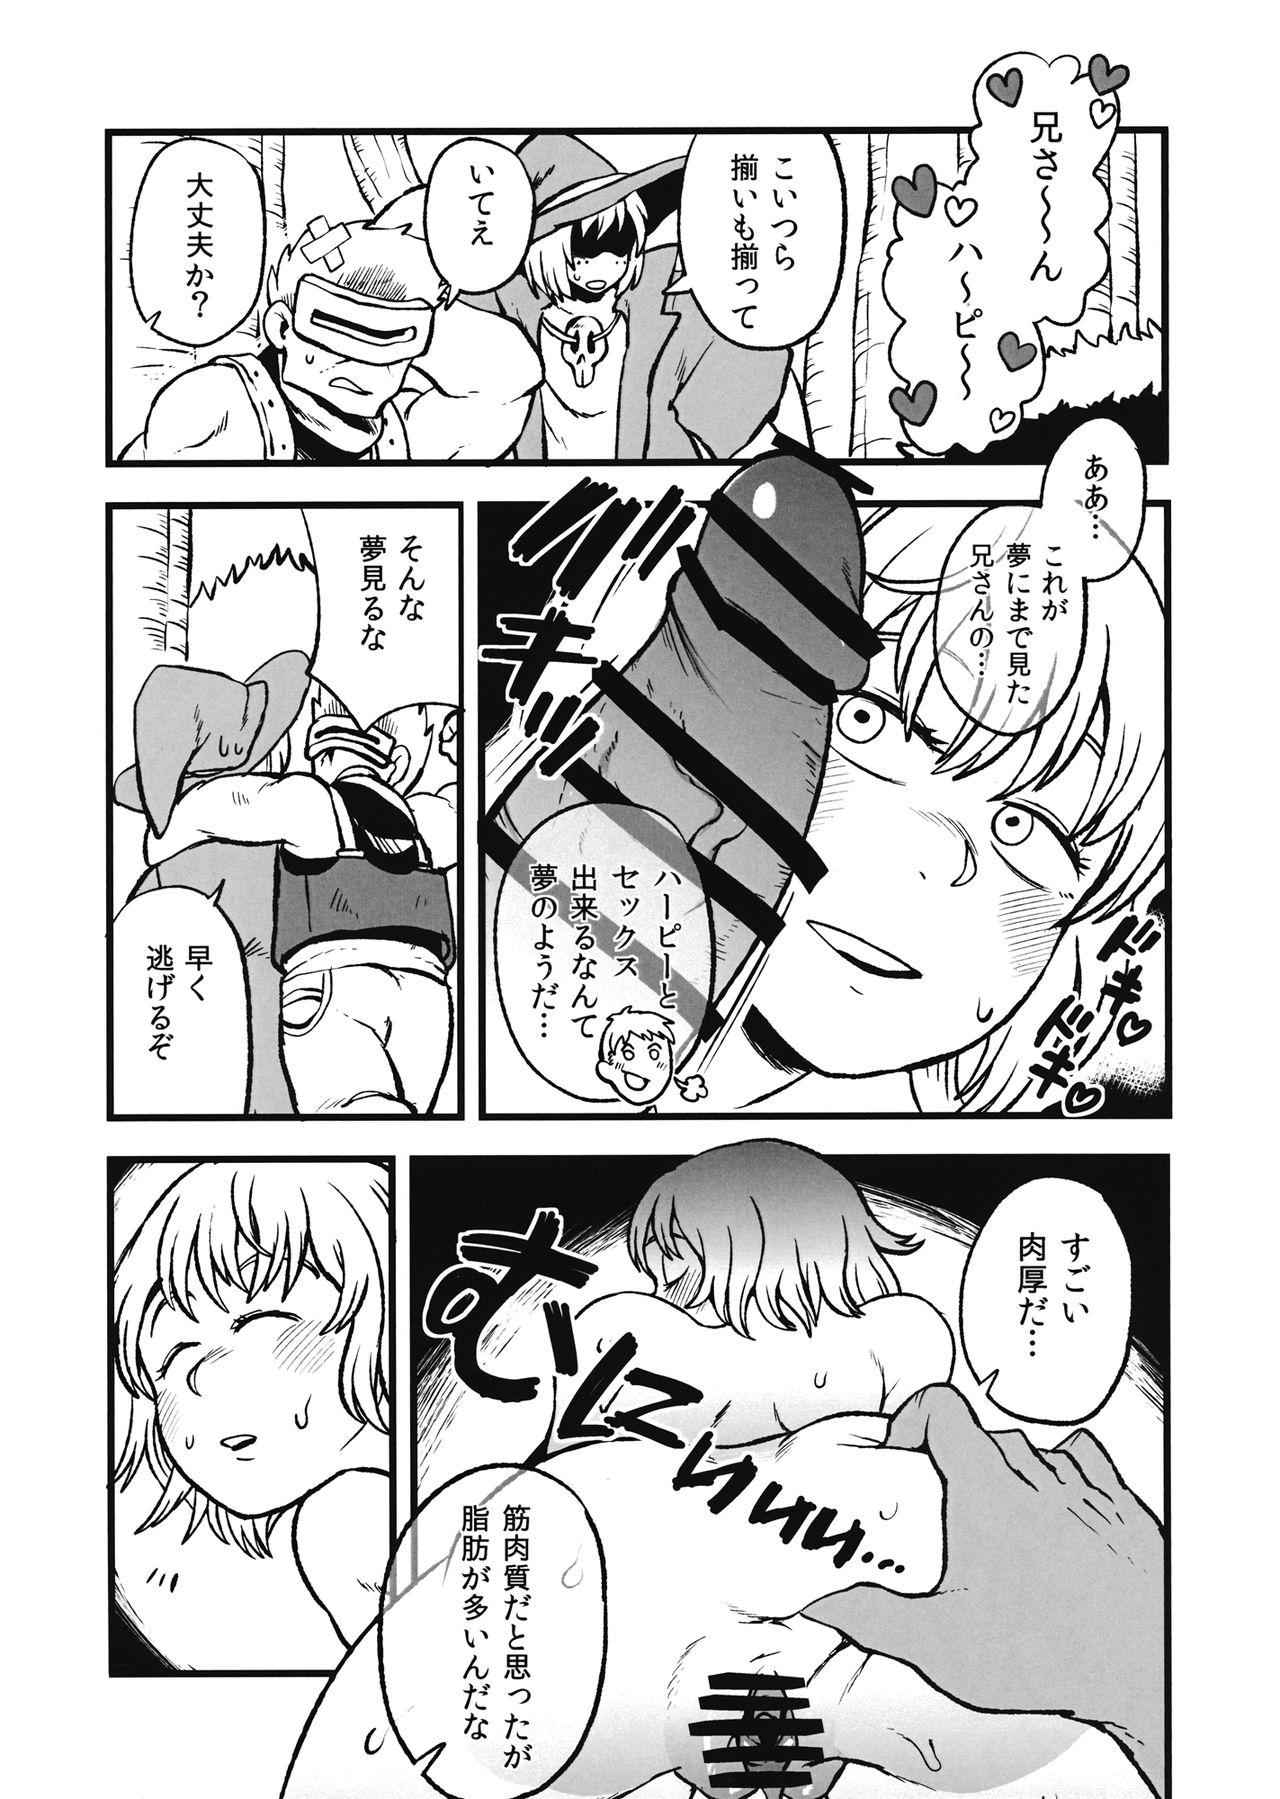 Outside Dungeon H - Dungeon meshi Public Nudity - Page 8